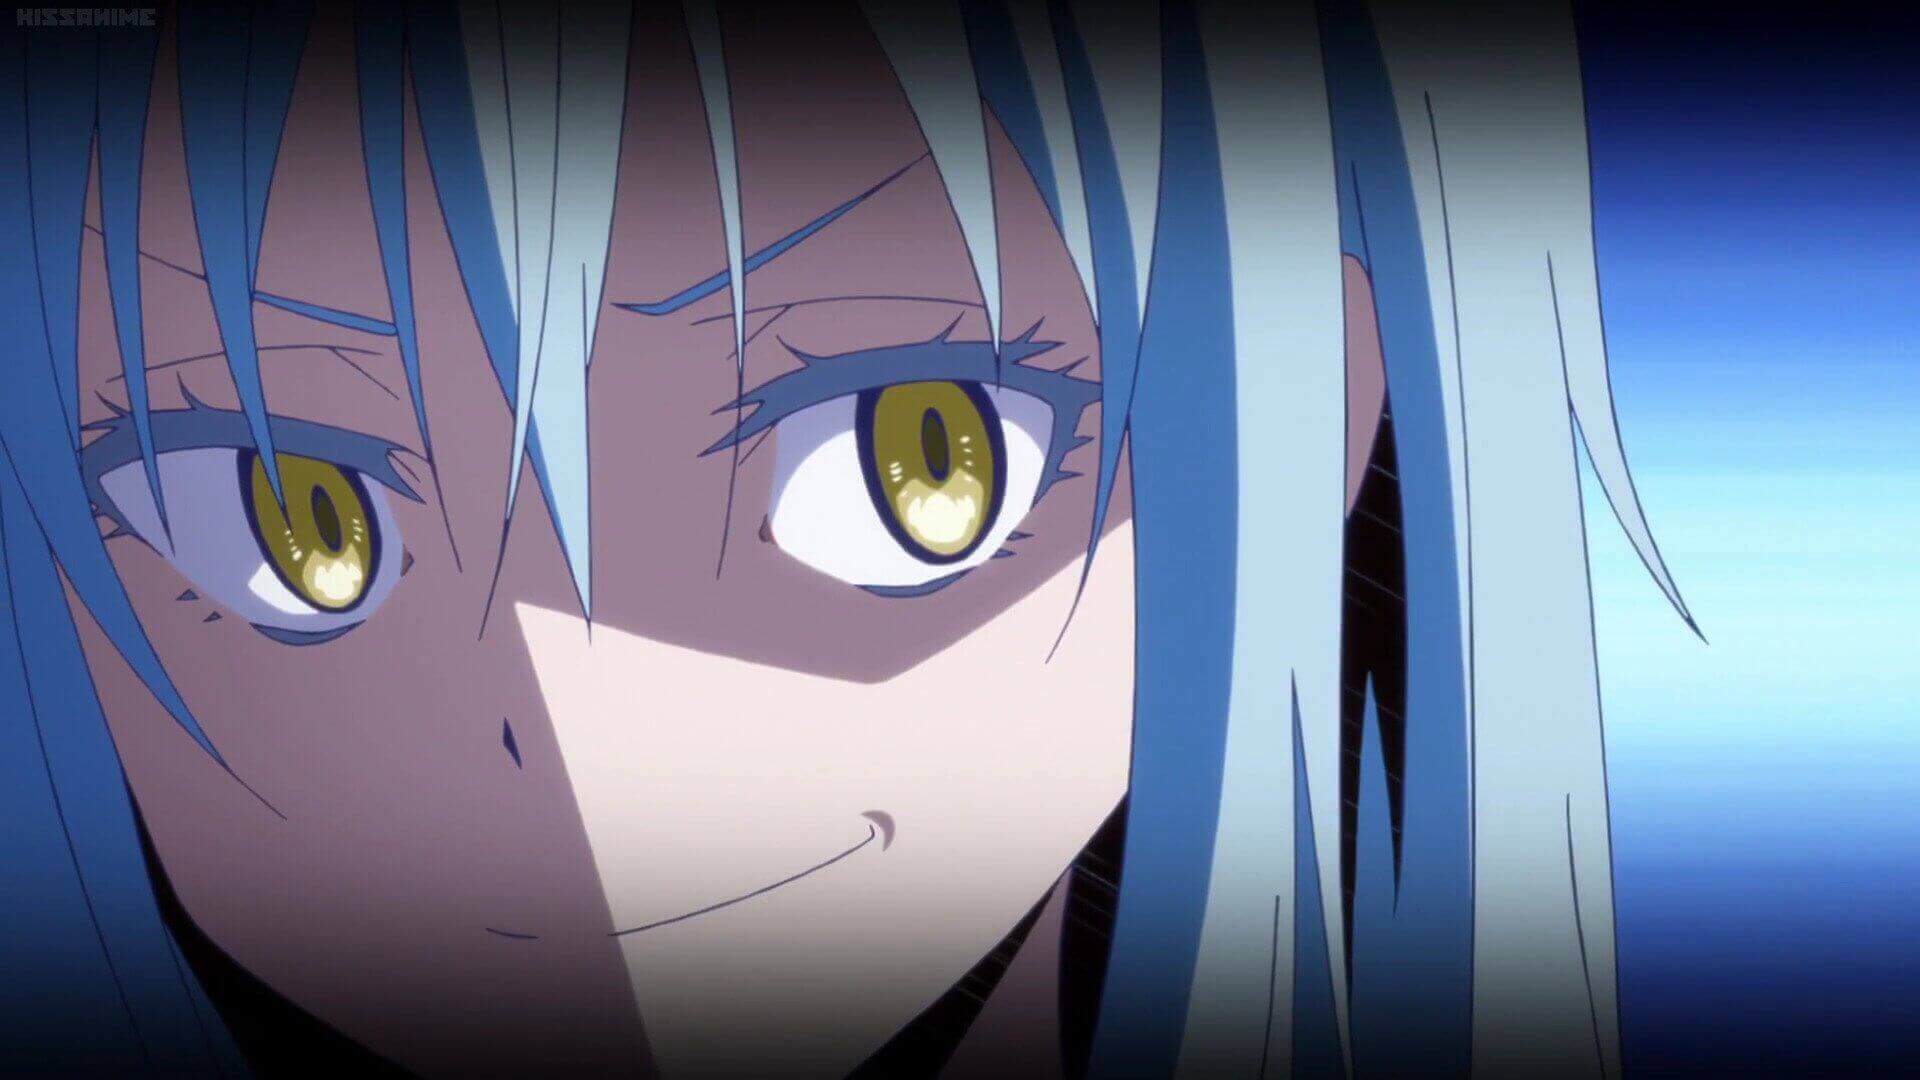 That Time I Got Reincarnated as a Slime Wallpaper HD image